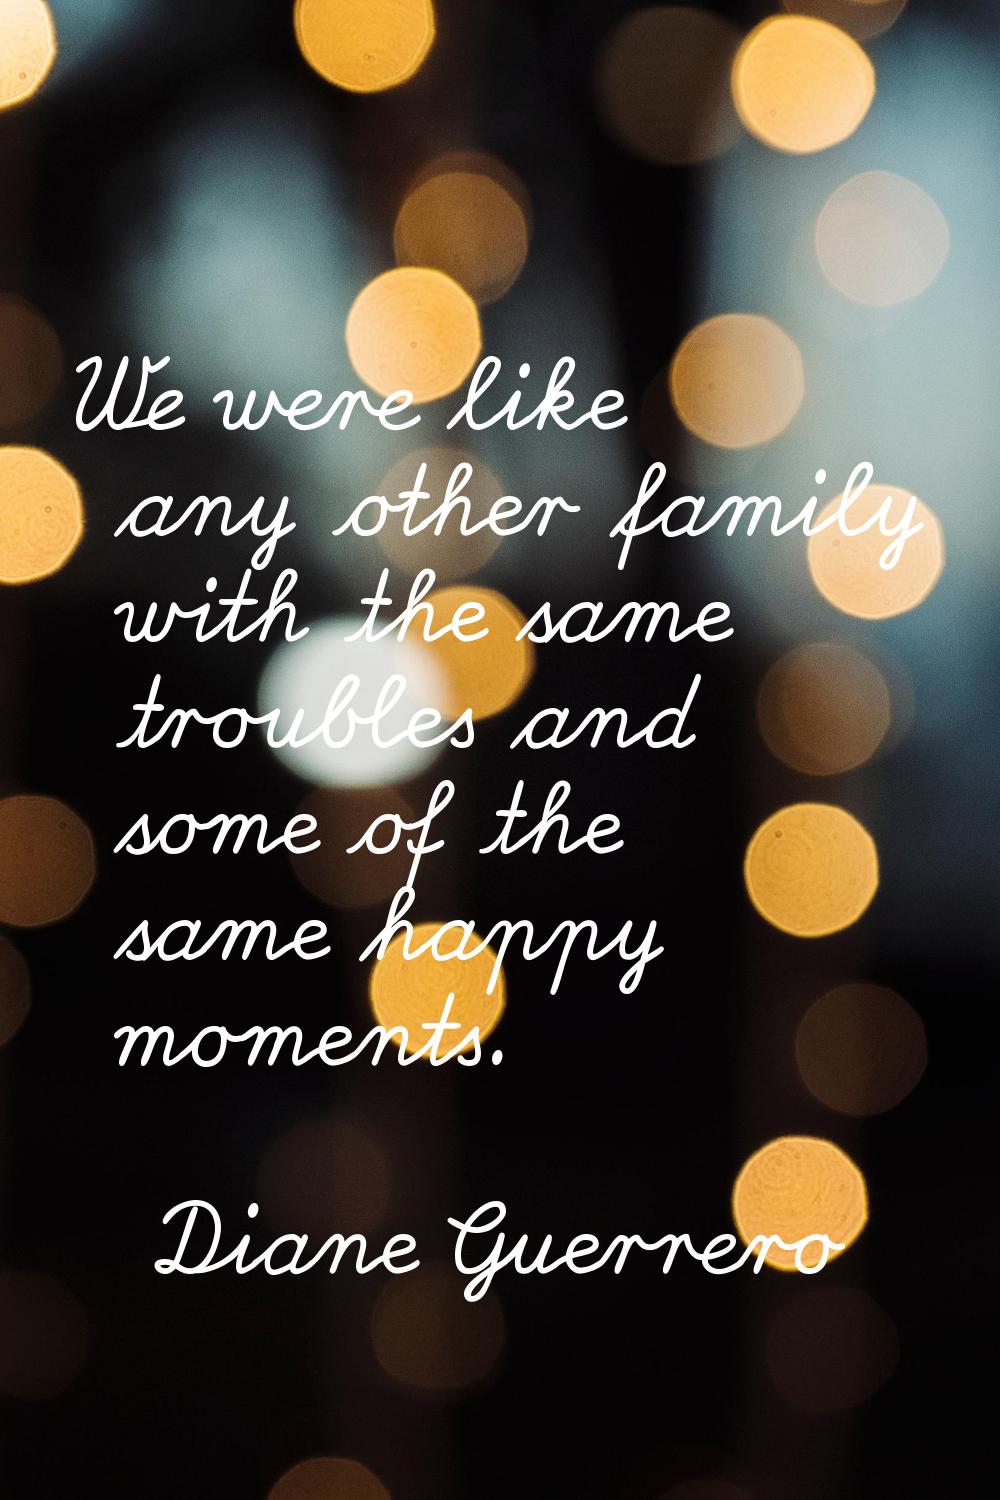 We were like any other family with the same troubles and some of the same happy moments.